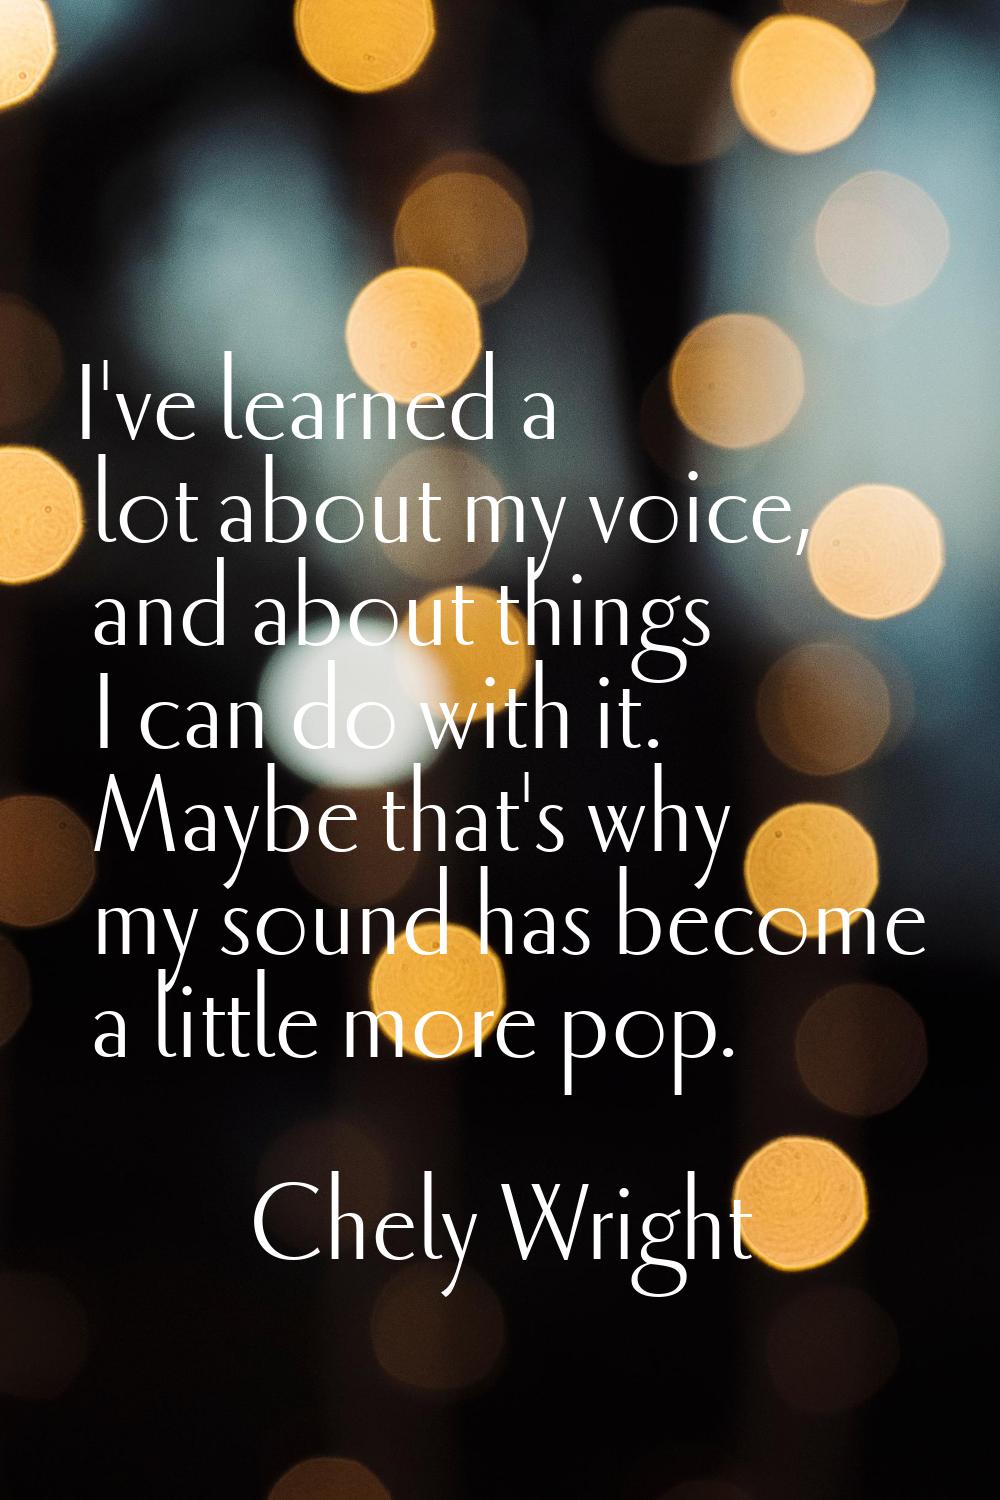 I've learned a lot about my voice, and about things I can do with it. Maybe that's why my sound has